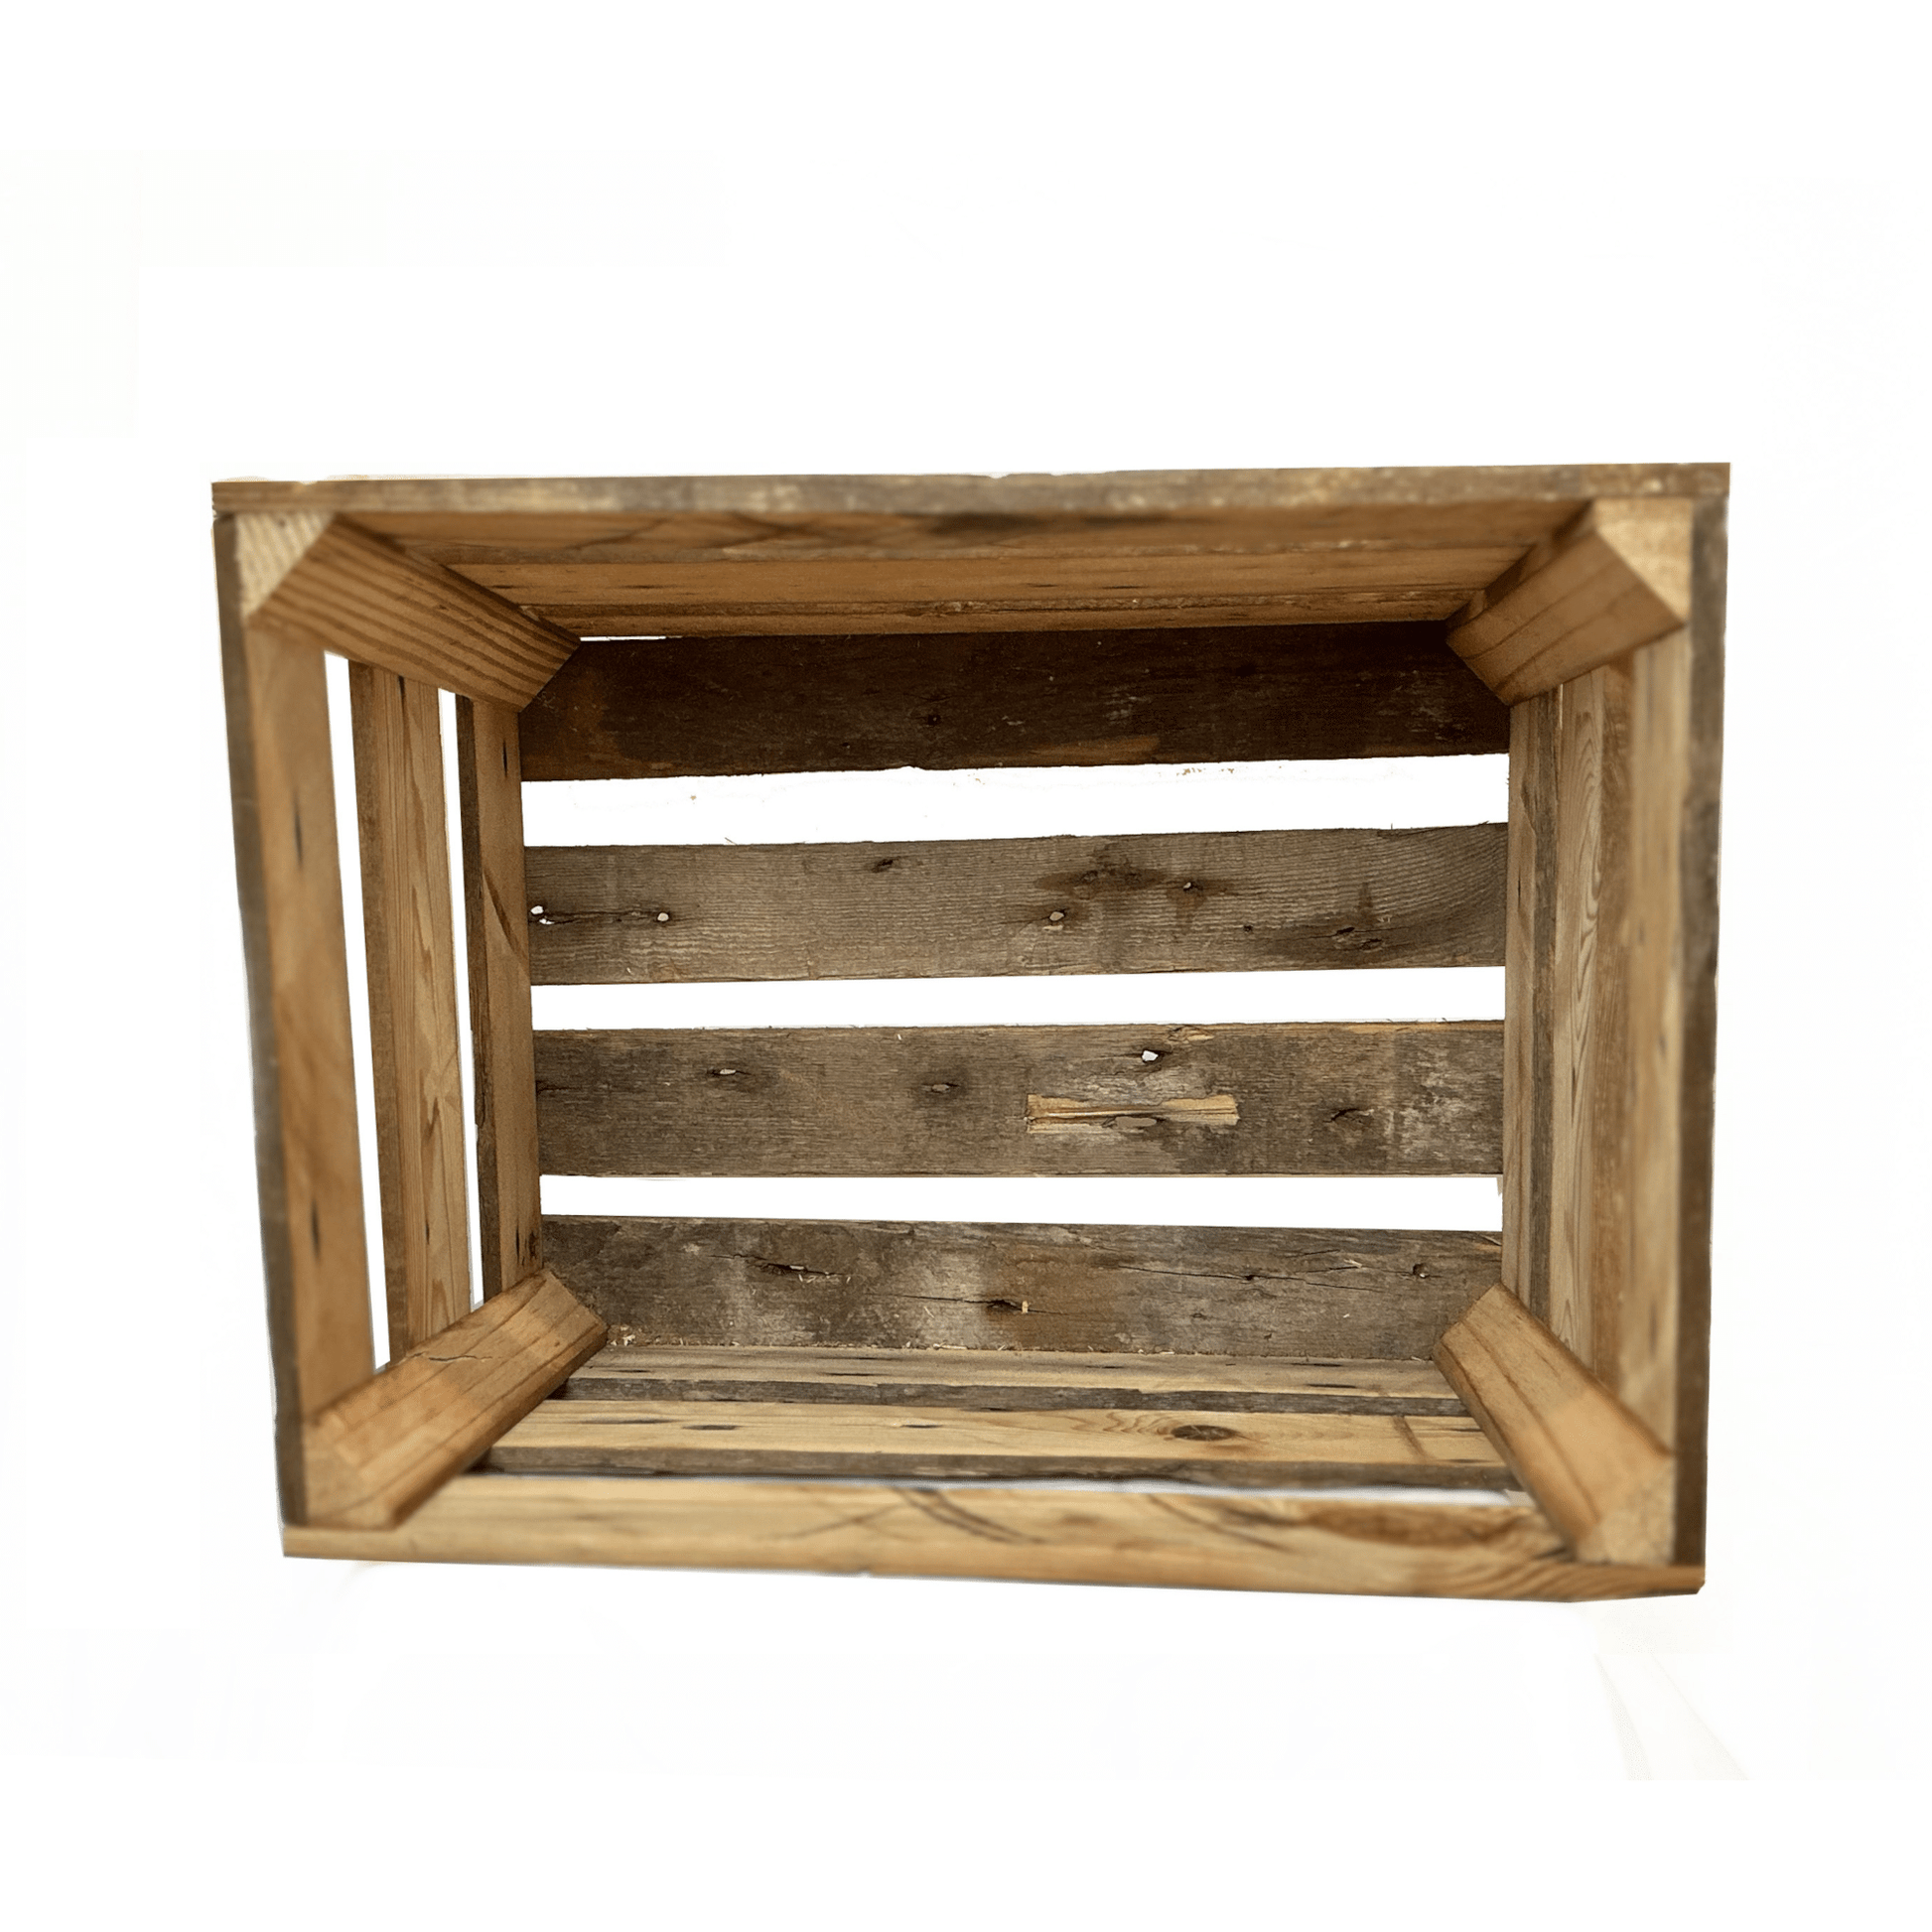 looking inside of a large wooden crate. There are four slats across the bottom with spaces in between. Each corner has a support.